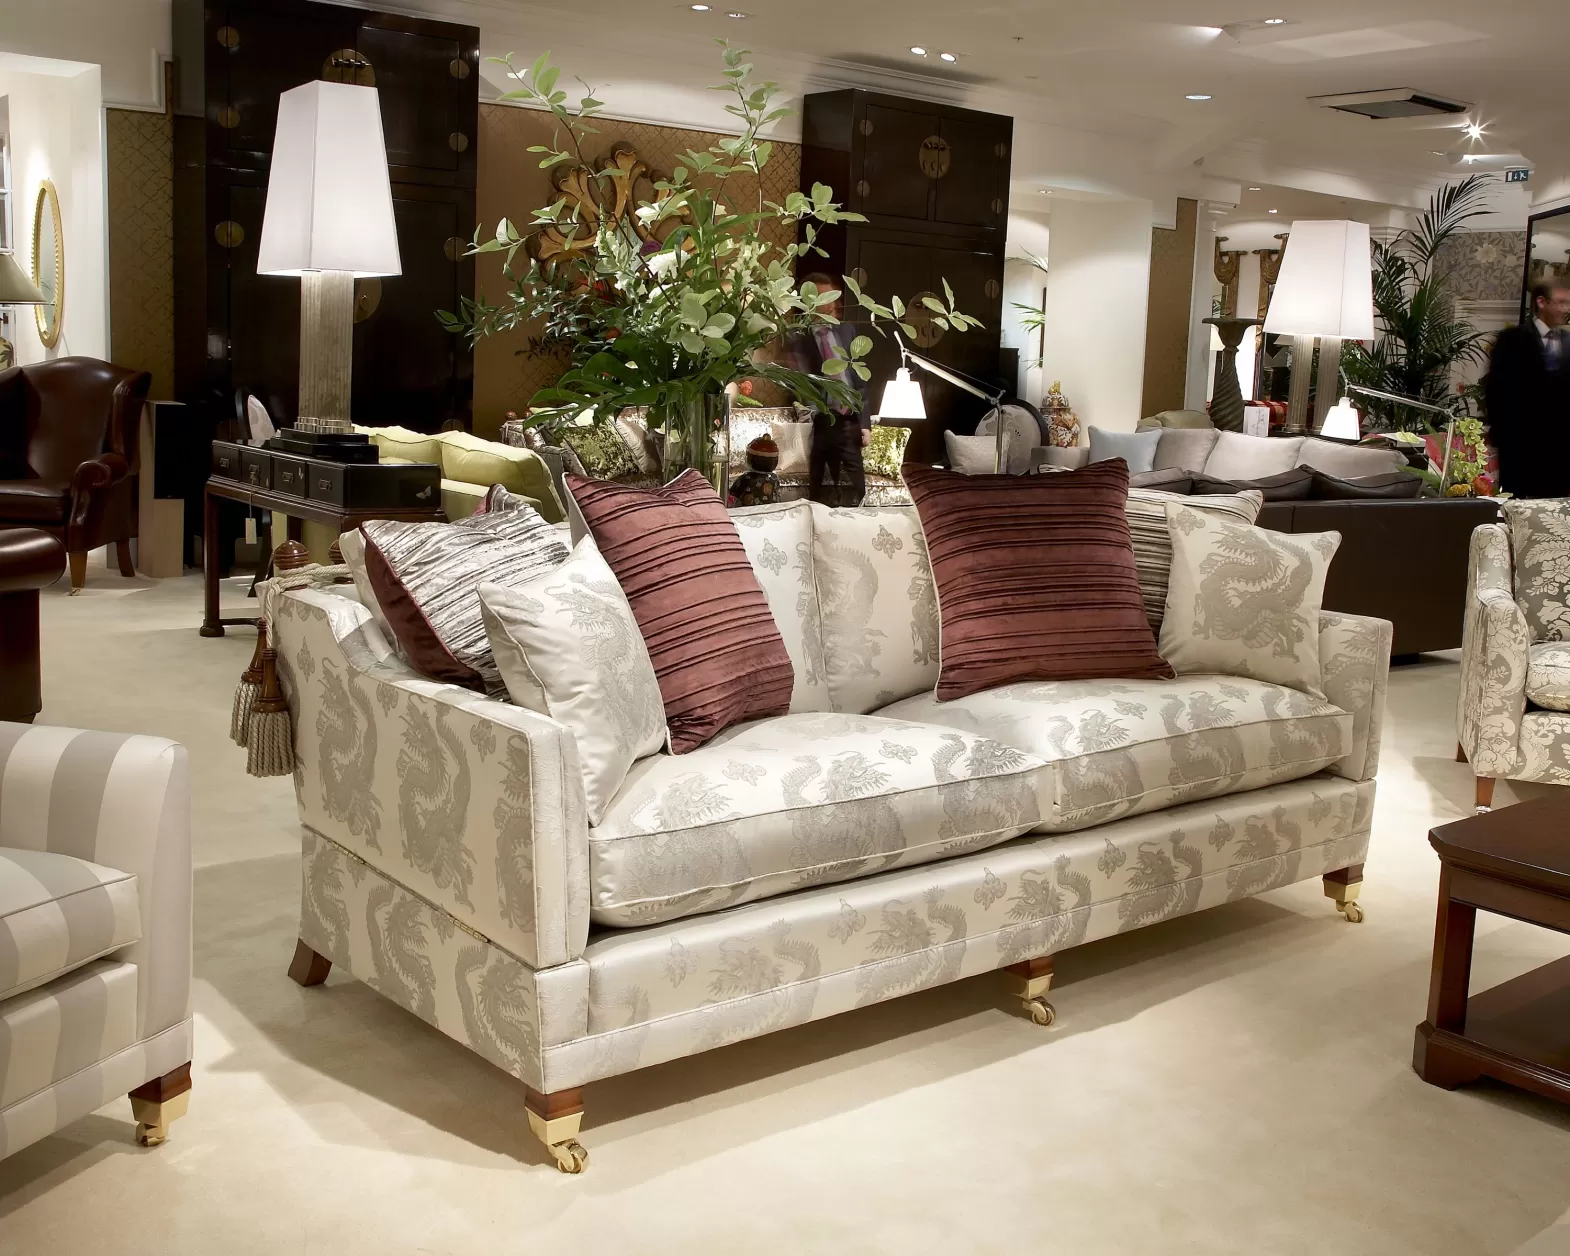 Step into the world of luxury with Duresta, now more accessible than ever with our exclusive clearance deals at Roomes. Celebrated for their intricate designs and stellar workmanship, Duresta pieces redefine opulence. Whether you're on the hunt for a grand sofa or an exquisite accent chair, our Duresta clearance range delivers unparalleled excellence at unbeatable prices. This is your golden chance to infuse your home with the premium touch of Duresta's renowned craftsmanship without the premium price tag. Dive in and make a sophisticated statement today.
